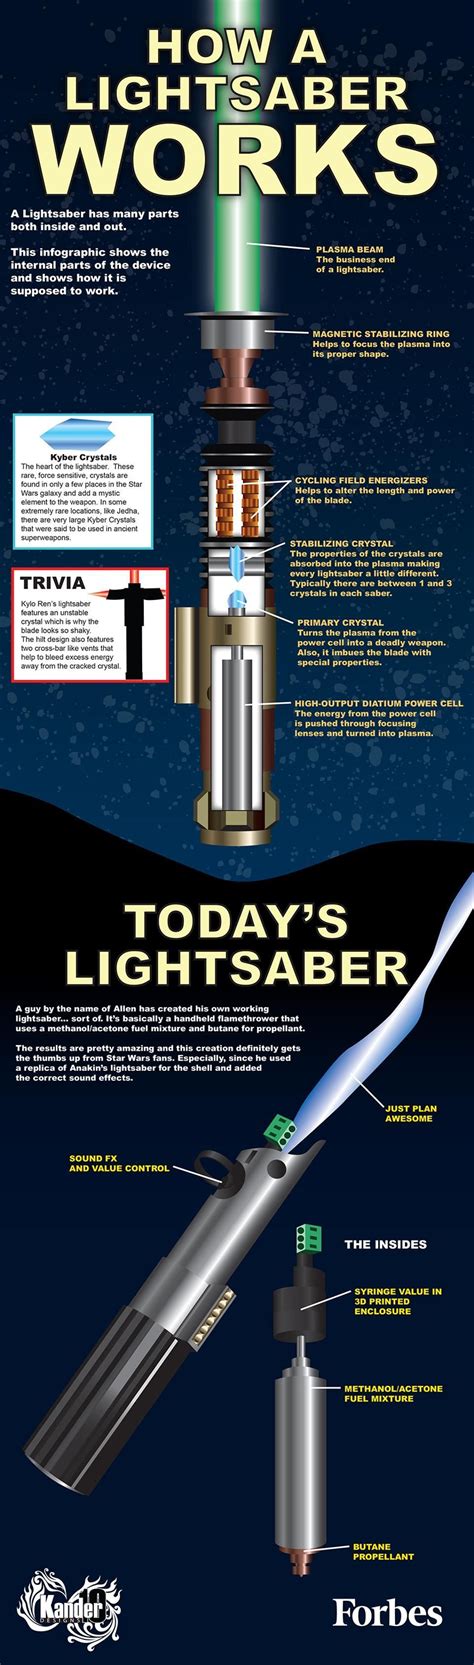 How A Lightsaber Works Infographic With Images Star Wars Images